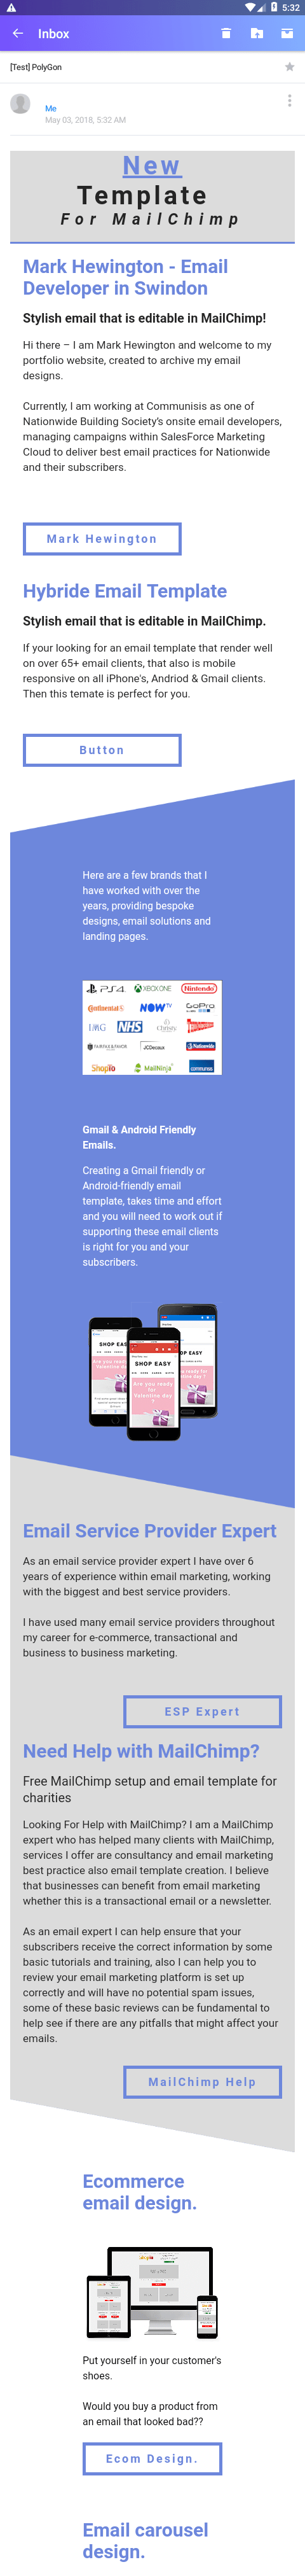 Editable MailChimp Email Template for Yahoo Android 7 version